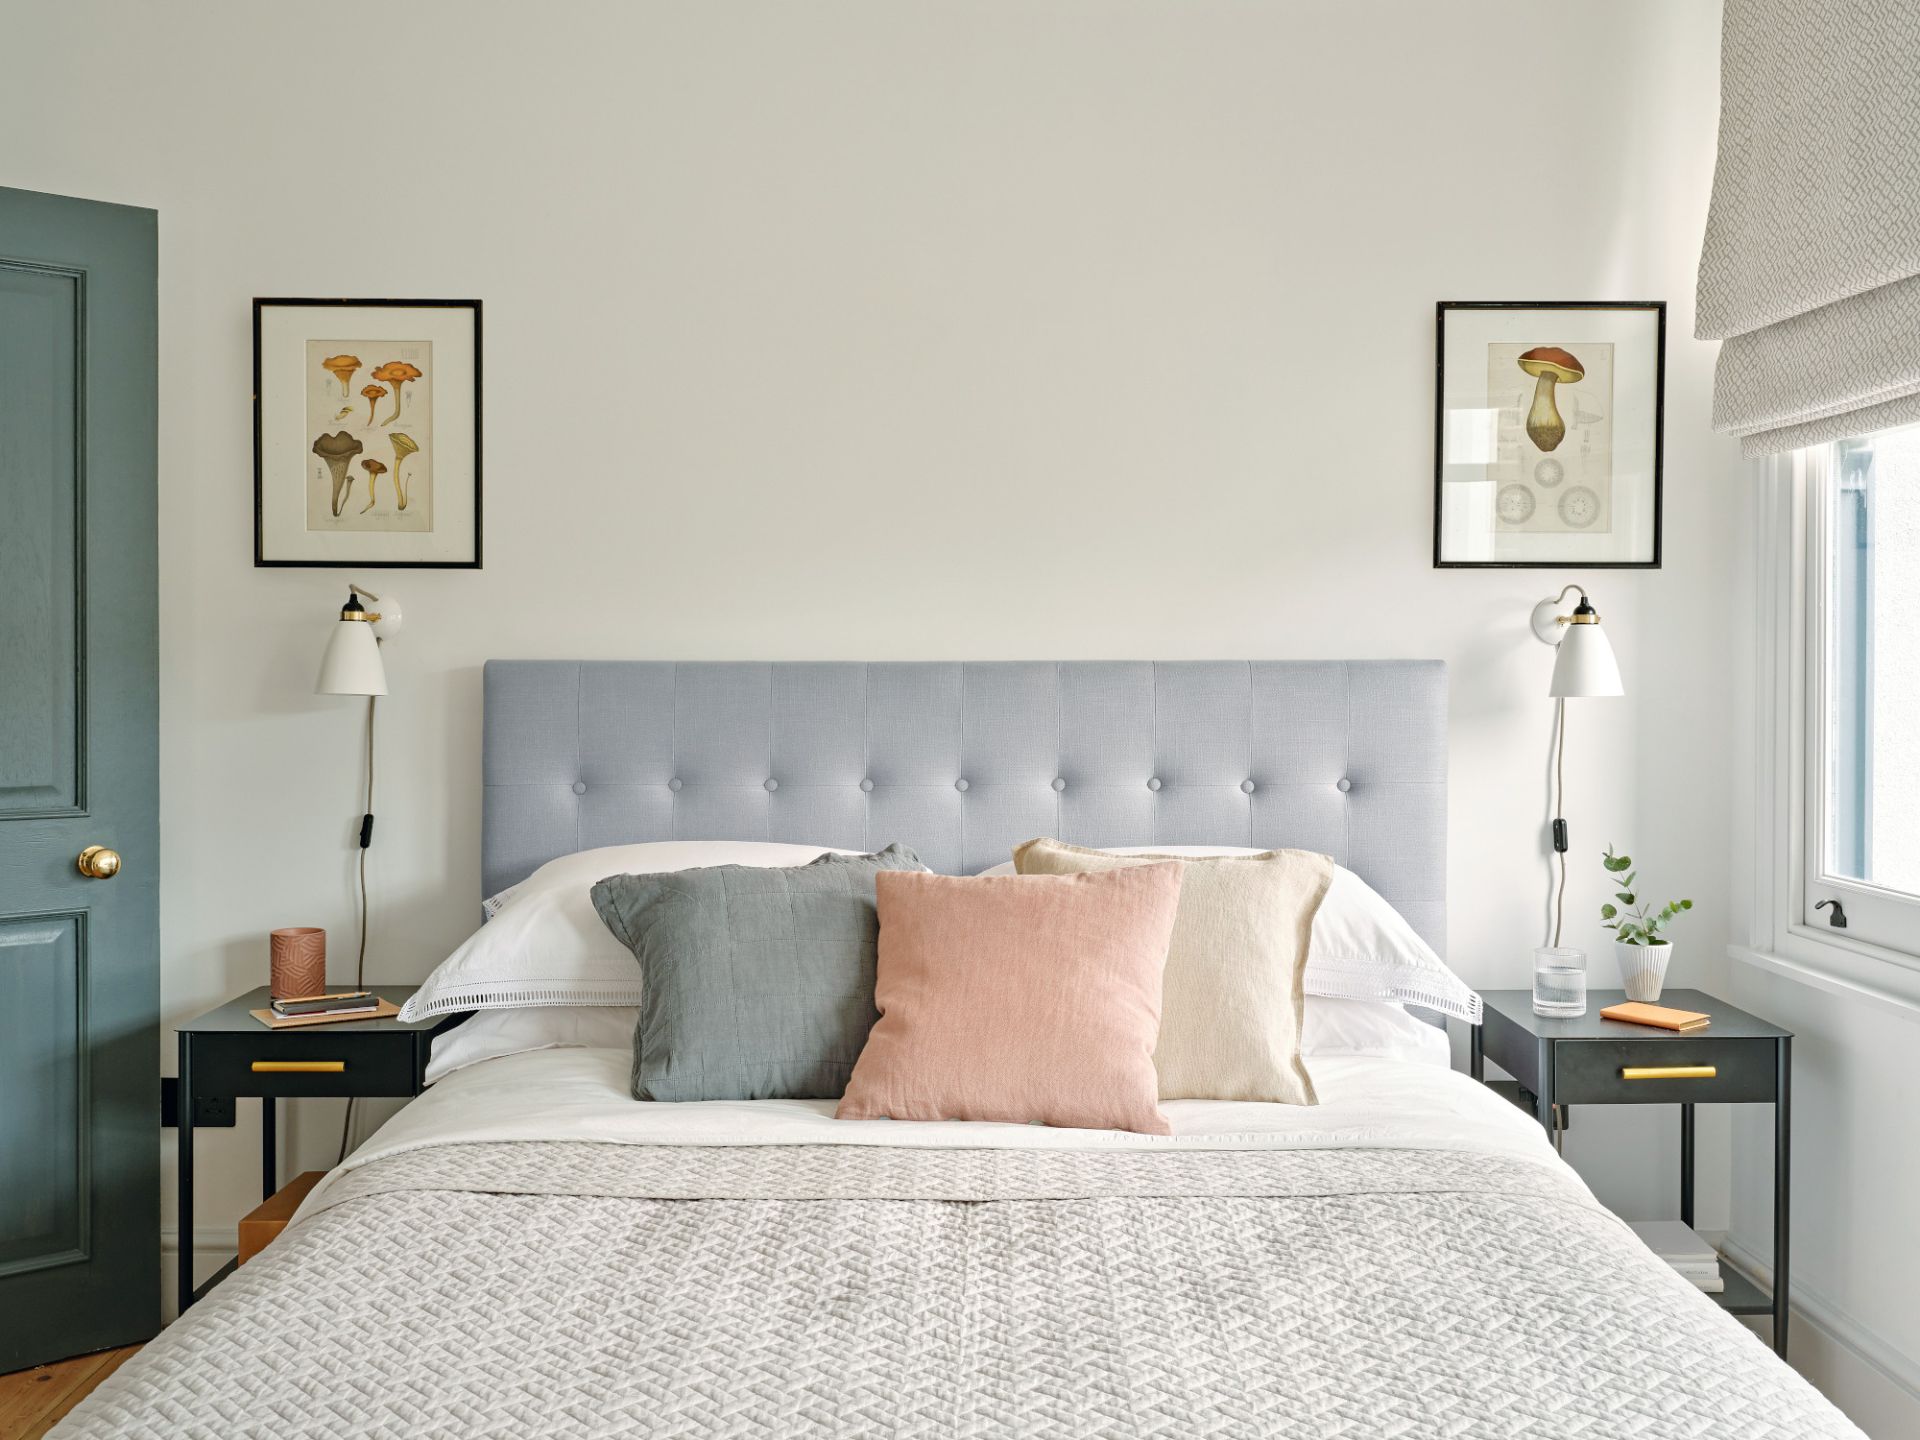 <p>                     'Gray and pink is a great pairing. This often works best with darker, more serious gray tones and a lighter, airy pink. The contrasting hues play well off of each other and create a balance that exudes sophistication,' says Andre Kazimierski, CEO at Improovy Painters St Louis.                   </p>